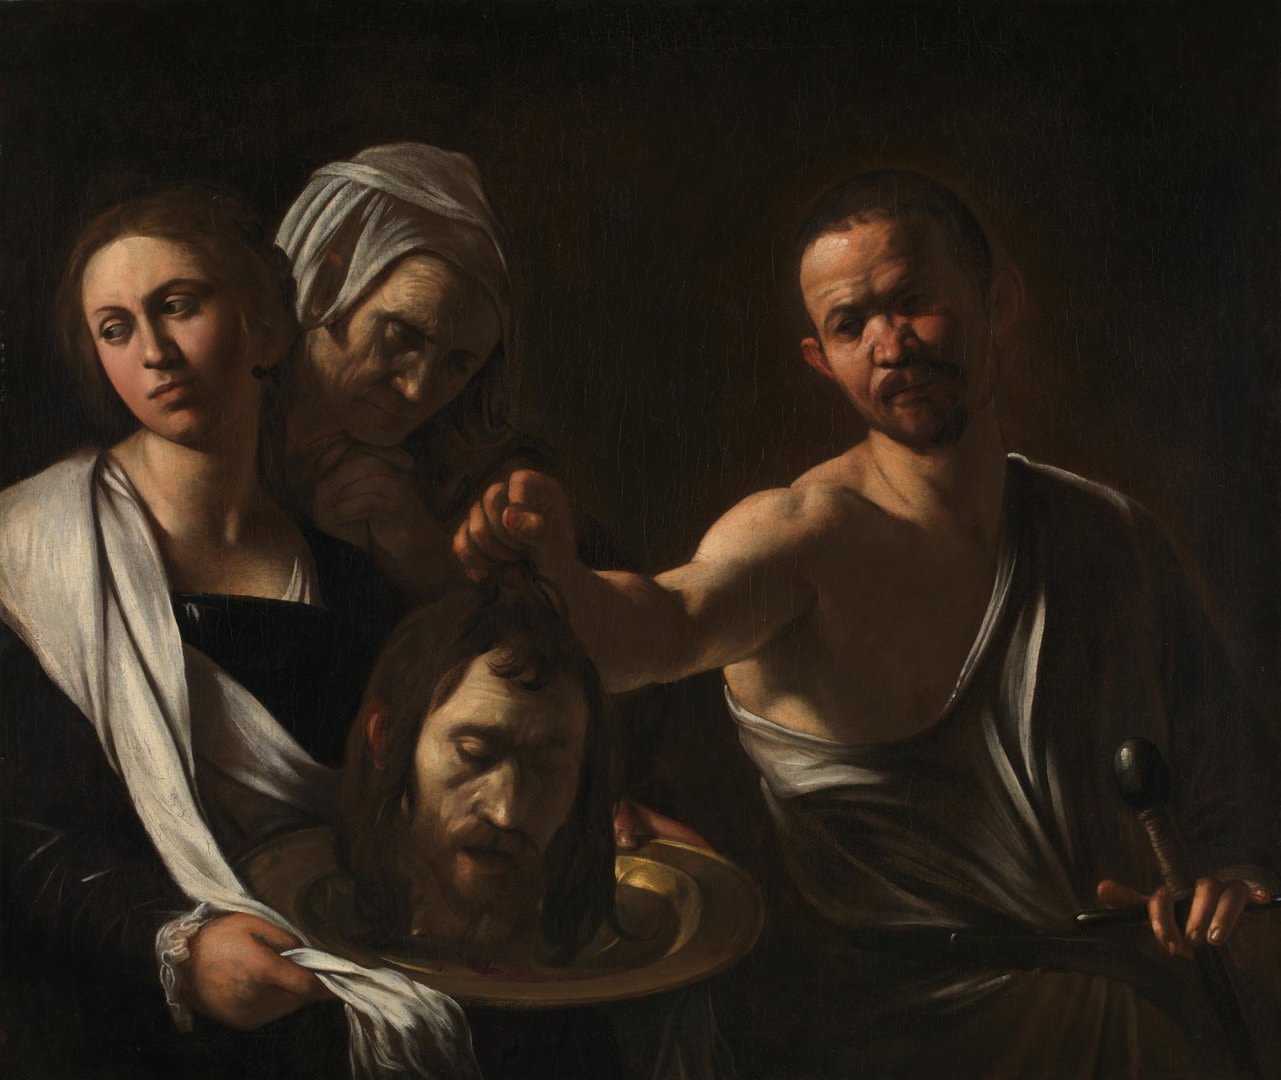 London’s National Gallery Presents a History of Violence as Painted By Caravaggio